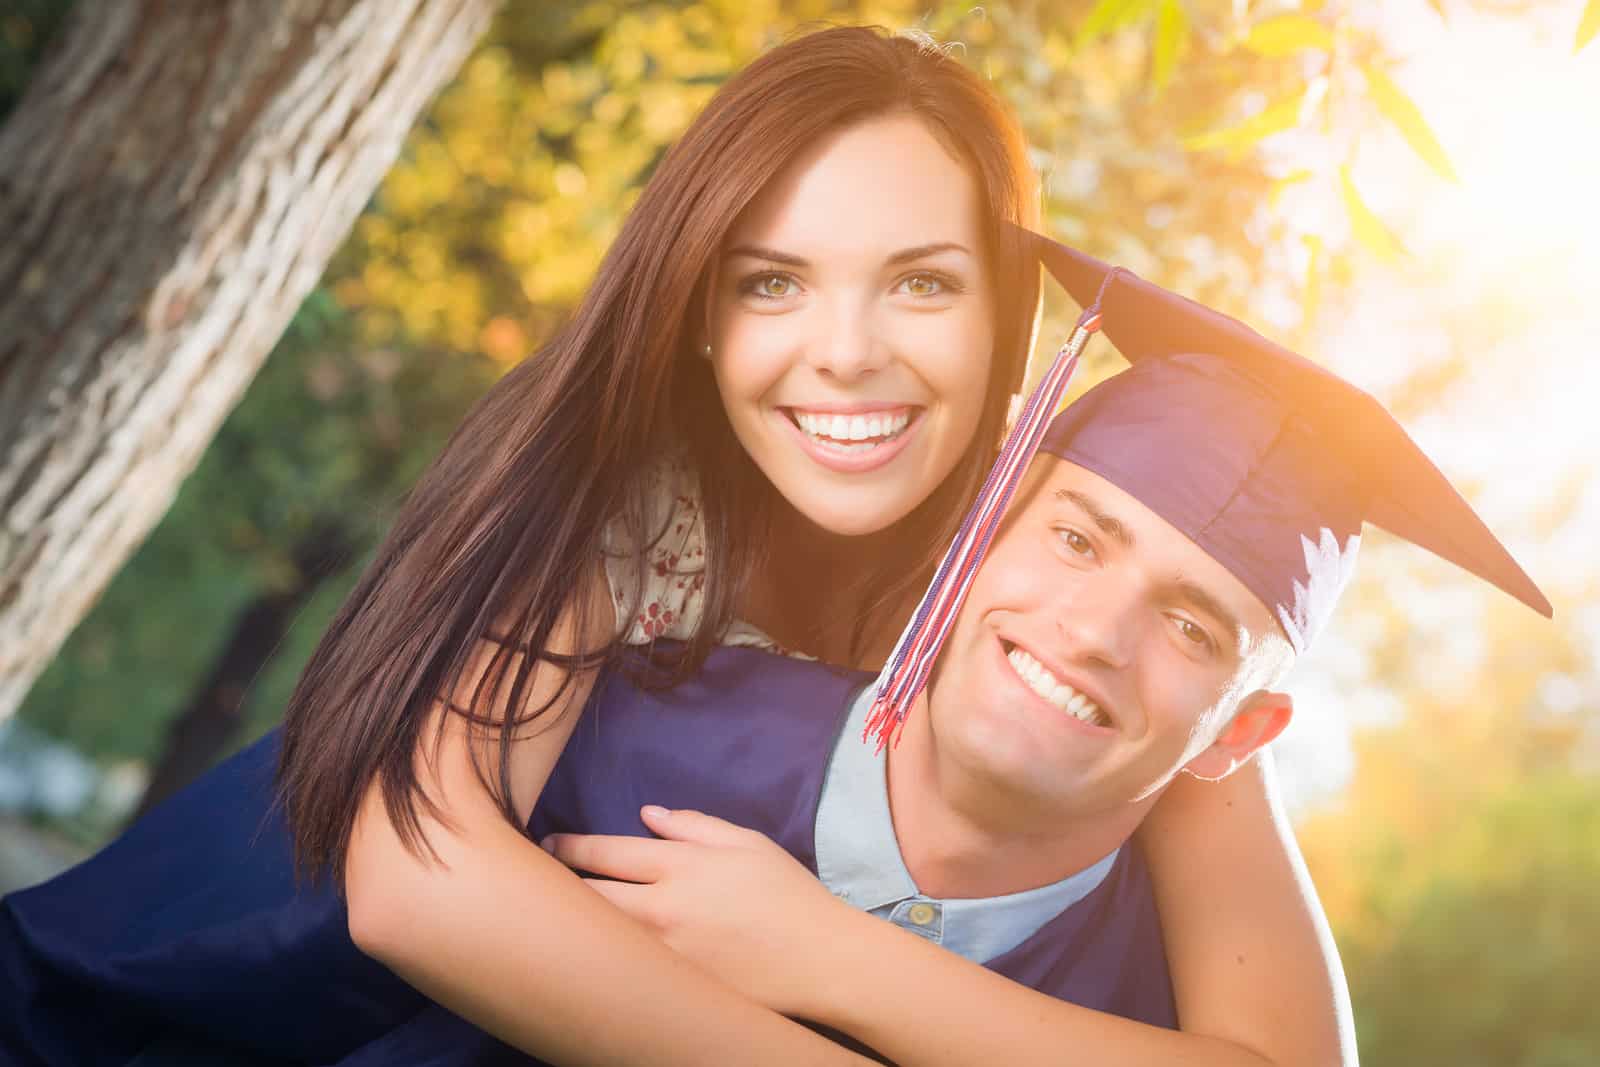 How to Decide if You Should Stay Together (or Break Up) After Graduation